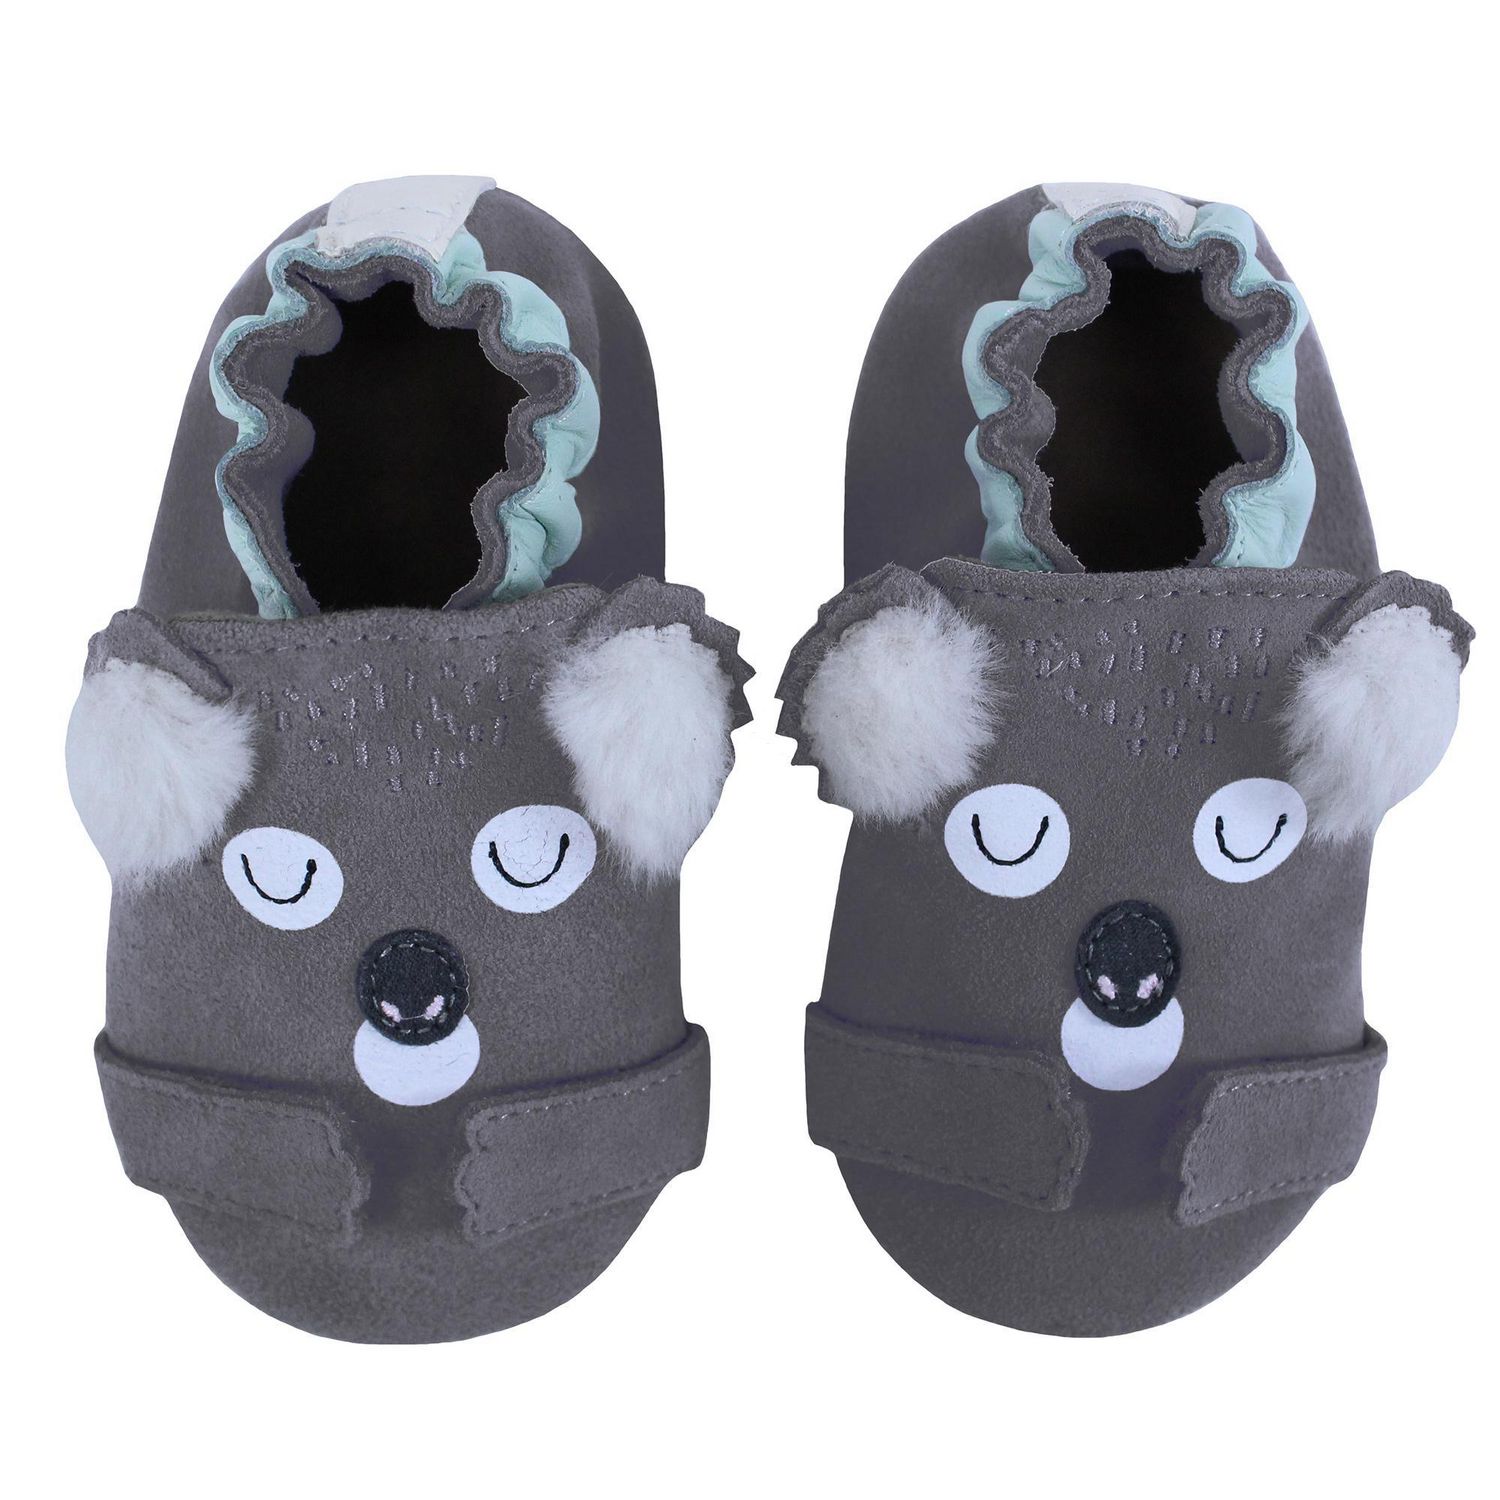 Robeez - Baby, Infant, Toddler - Soft Sole Leather Shoes with Suede ...